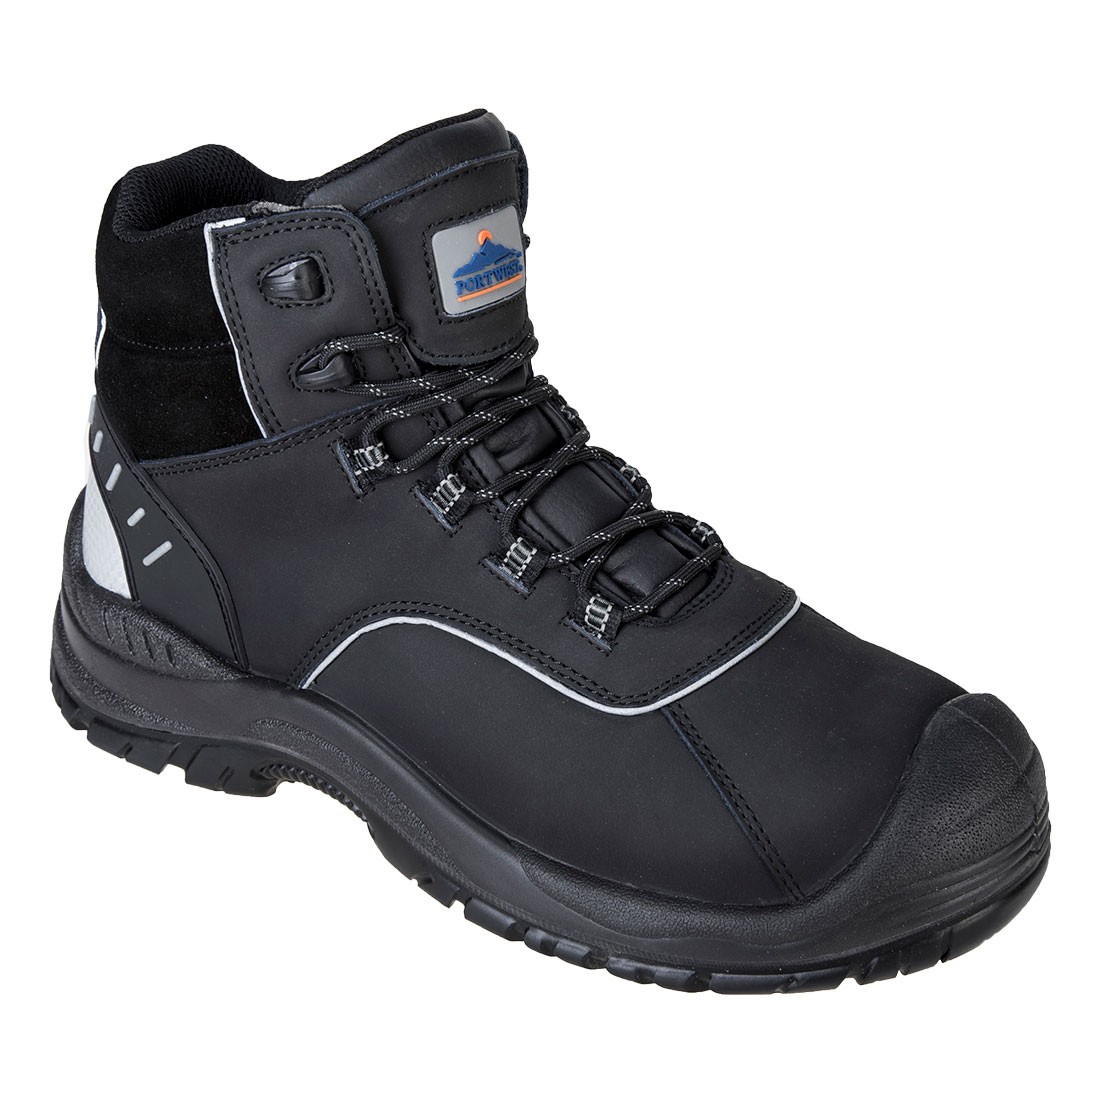 Chaussure securite montante S3 Avich portwest chaussures-pro